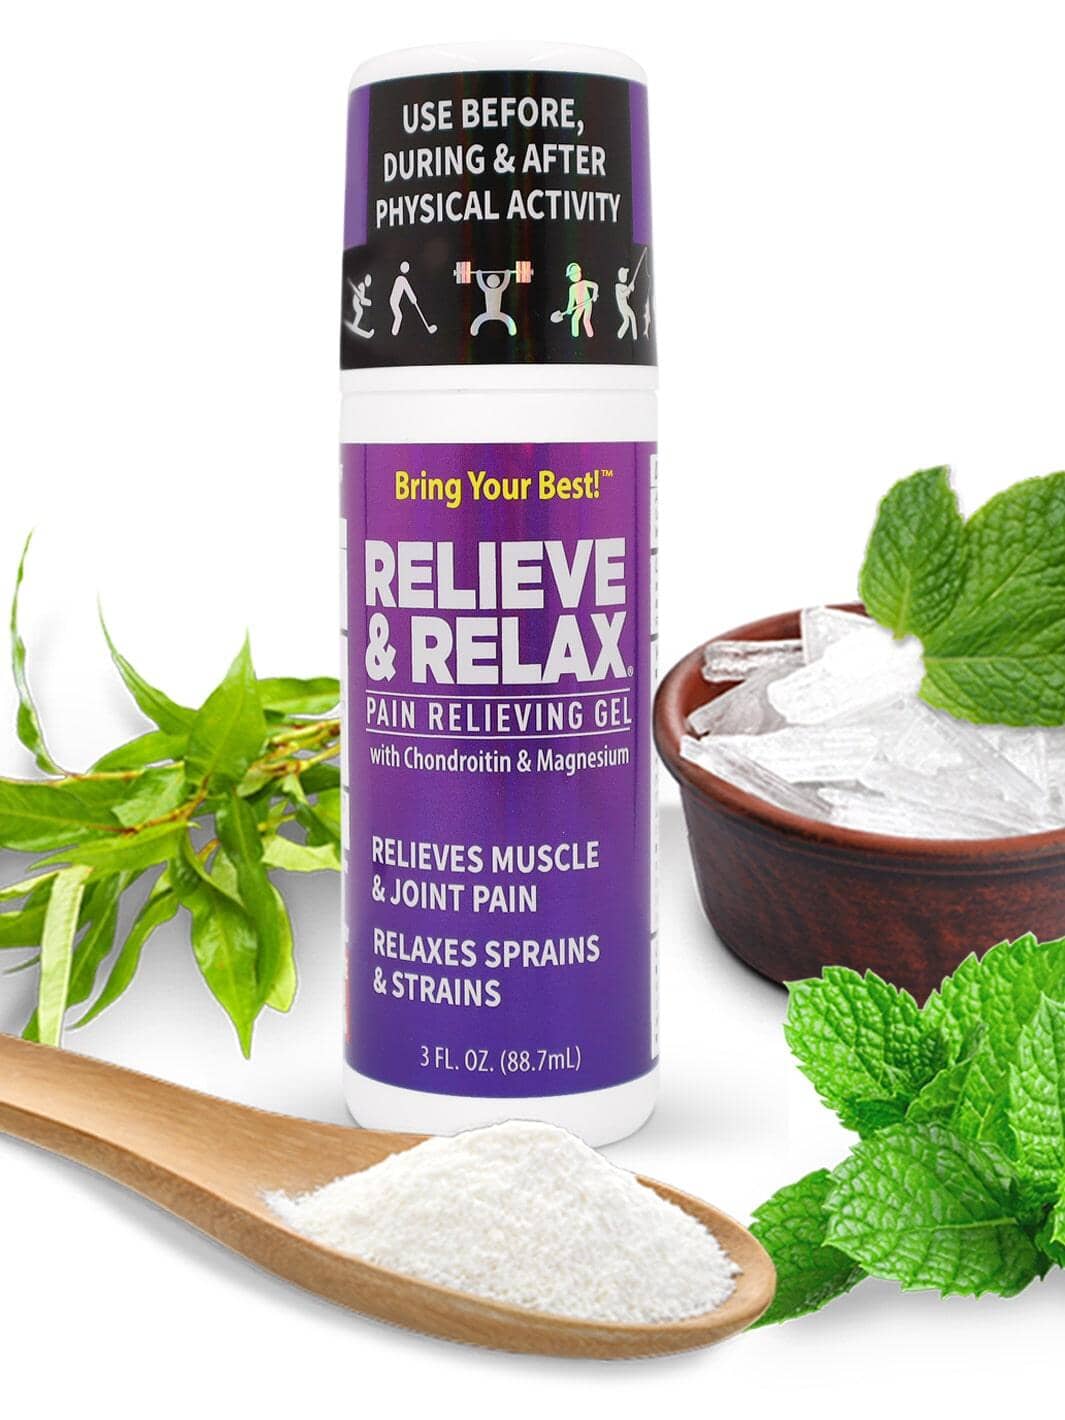 Relieve & Relax Pain Relief Gel Product